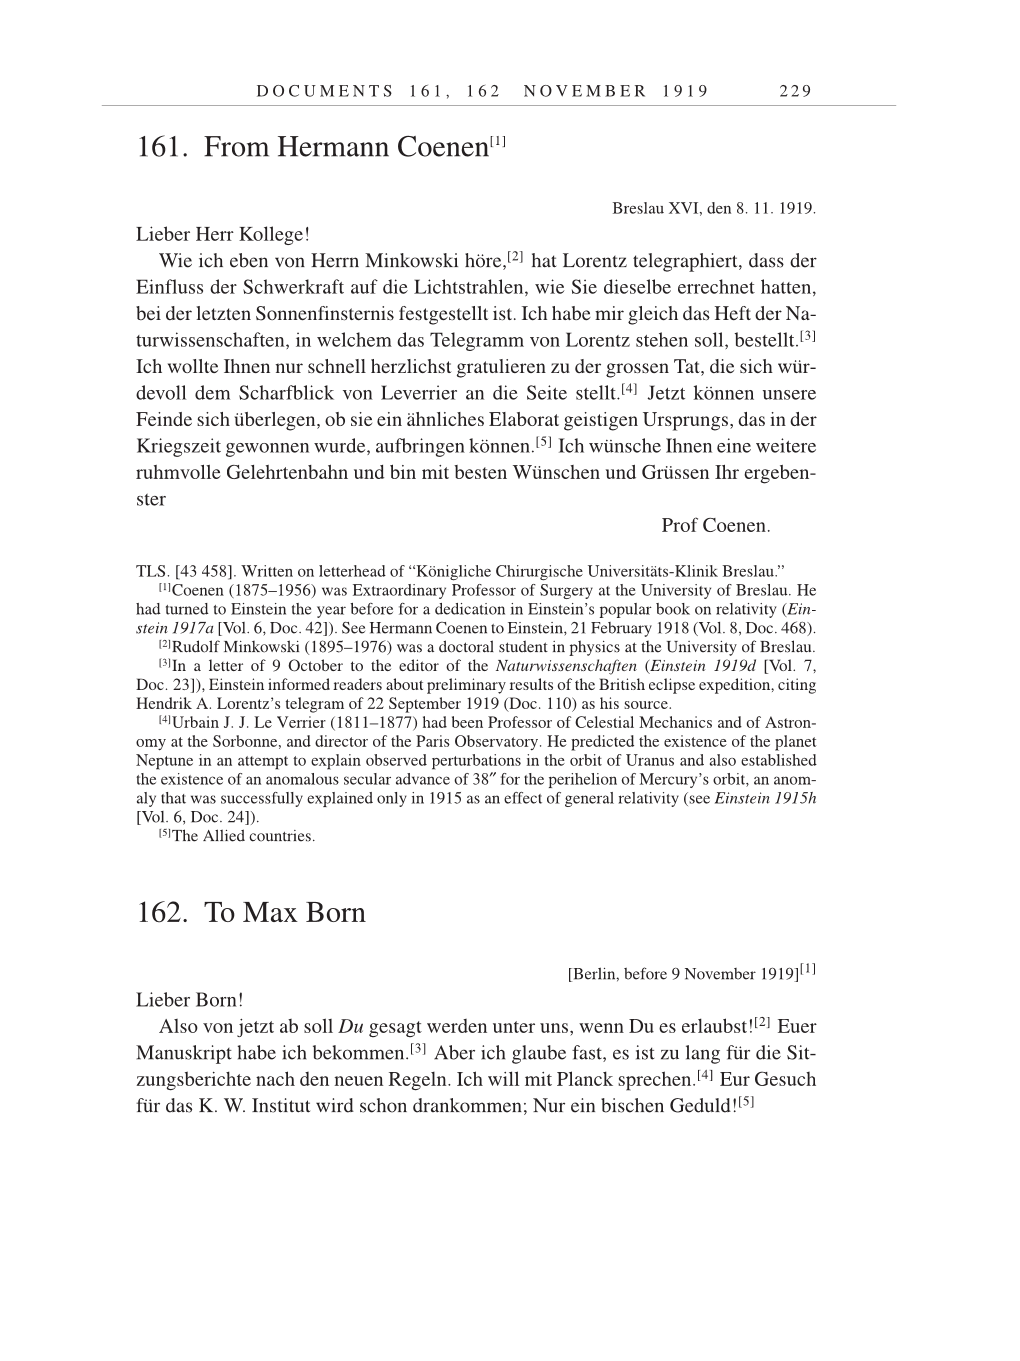 Volume 9: The Berlin Years: Correspondence January 1919-April 1920 page 229